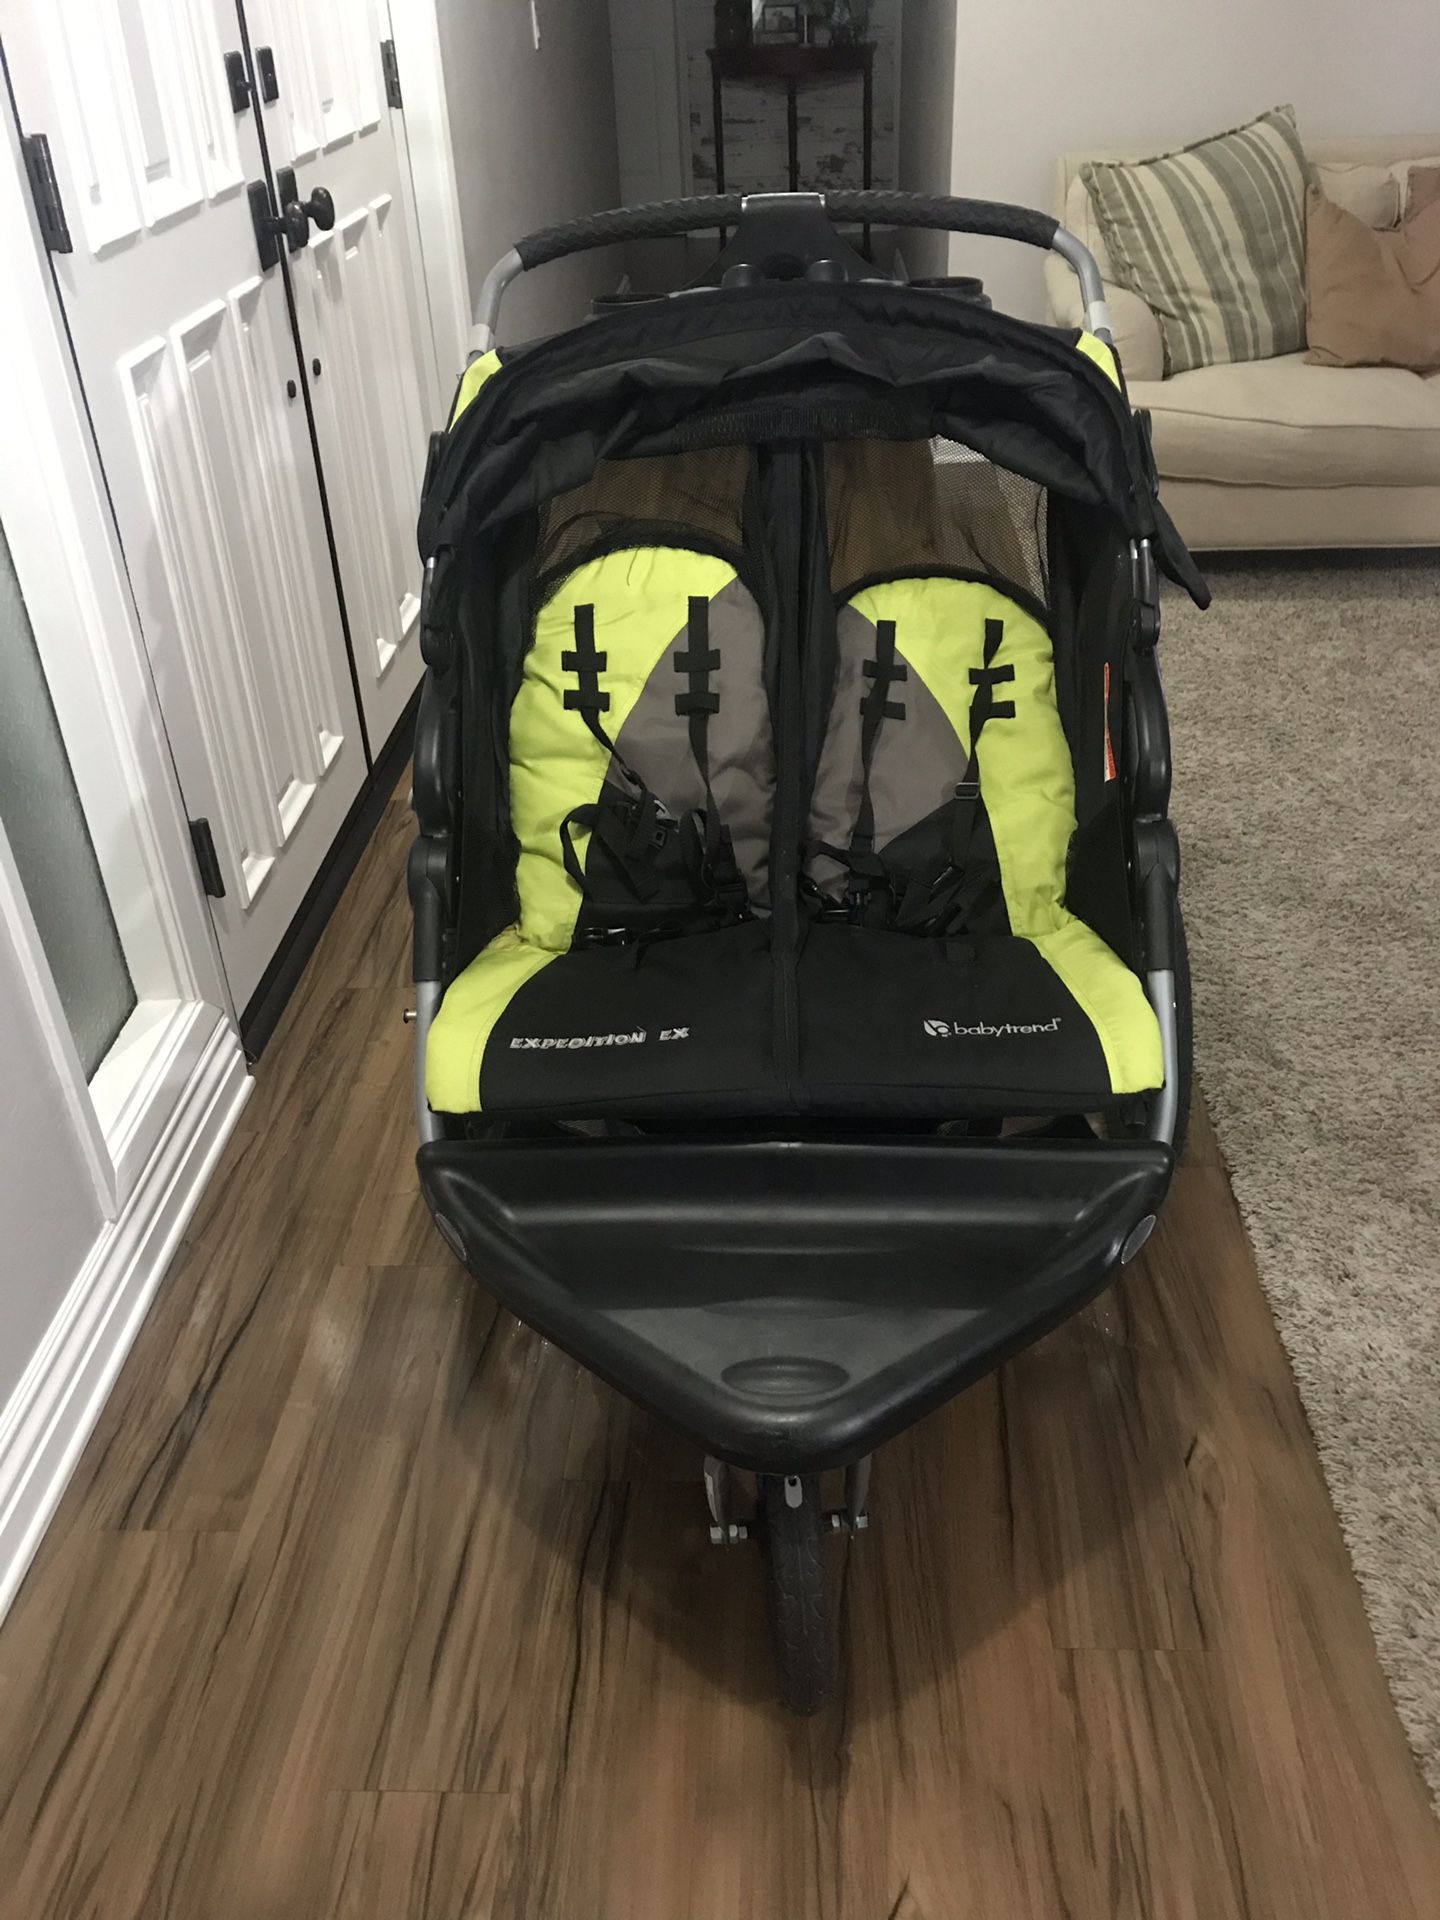 Expedition EX Double Stroller with MP3 speakers $100